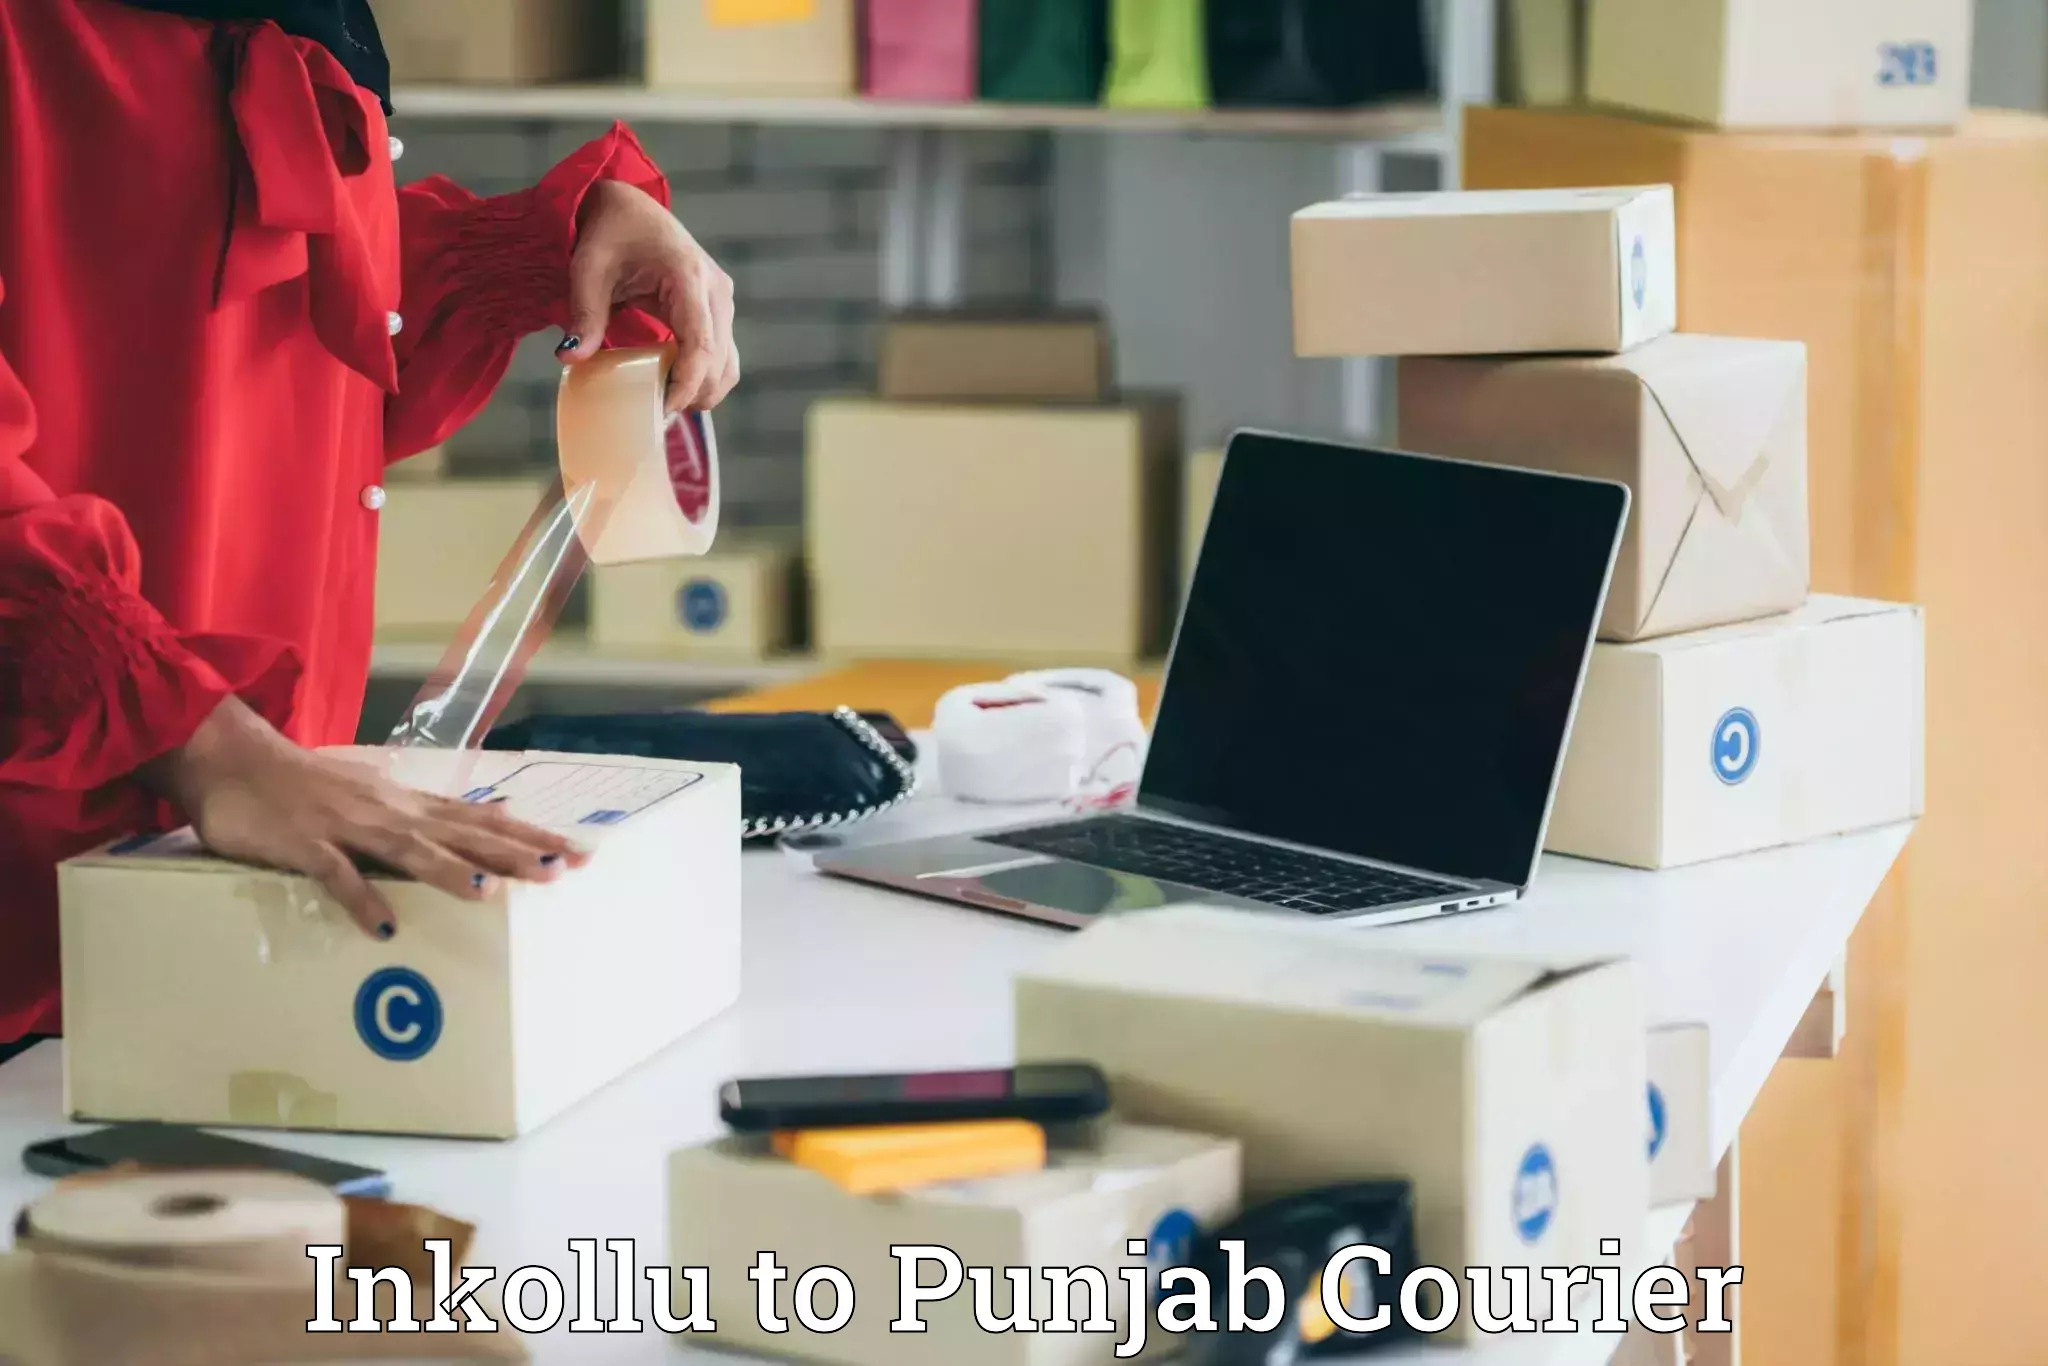 Express package delivery in Inkollu to Mohali